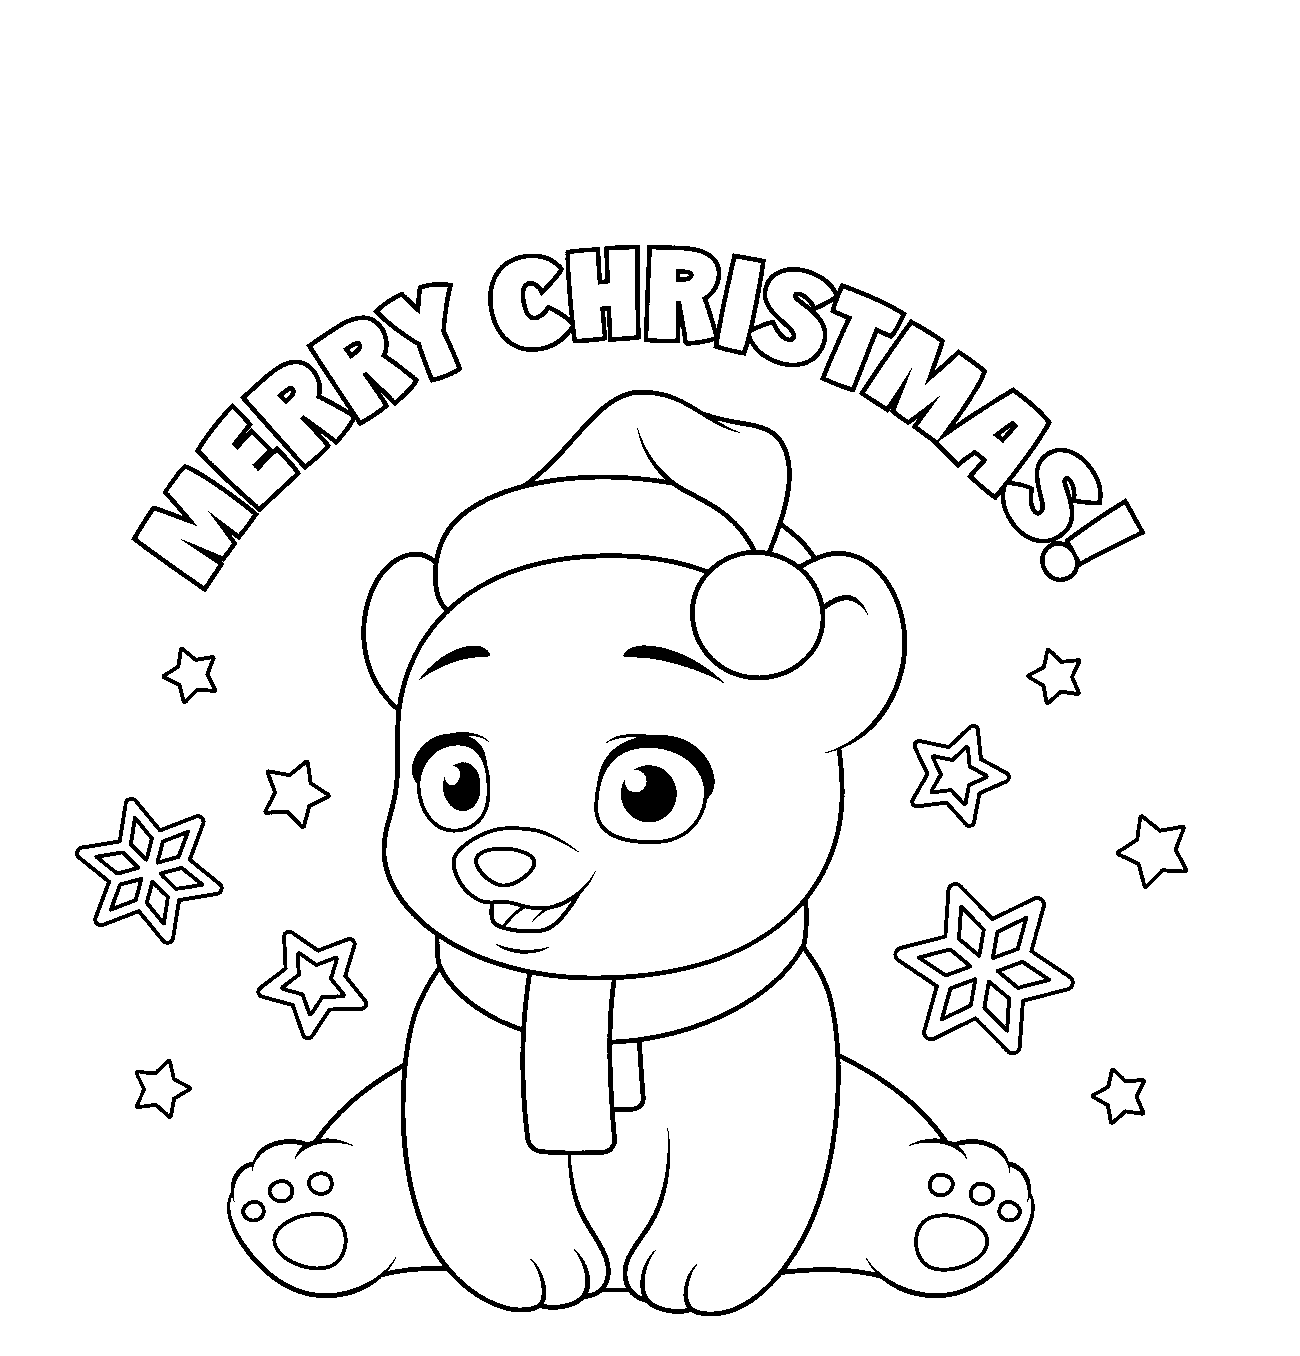 Cute Baby Bear In Christmas Santa Claus Hat Coloring Page